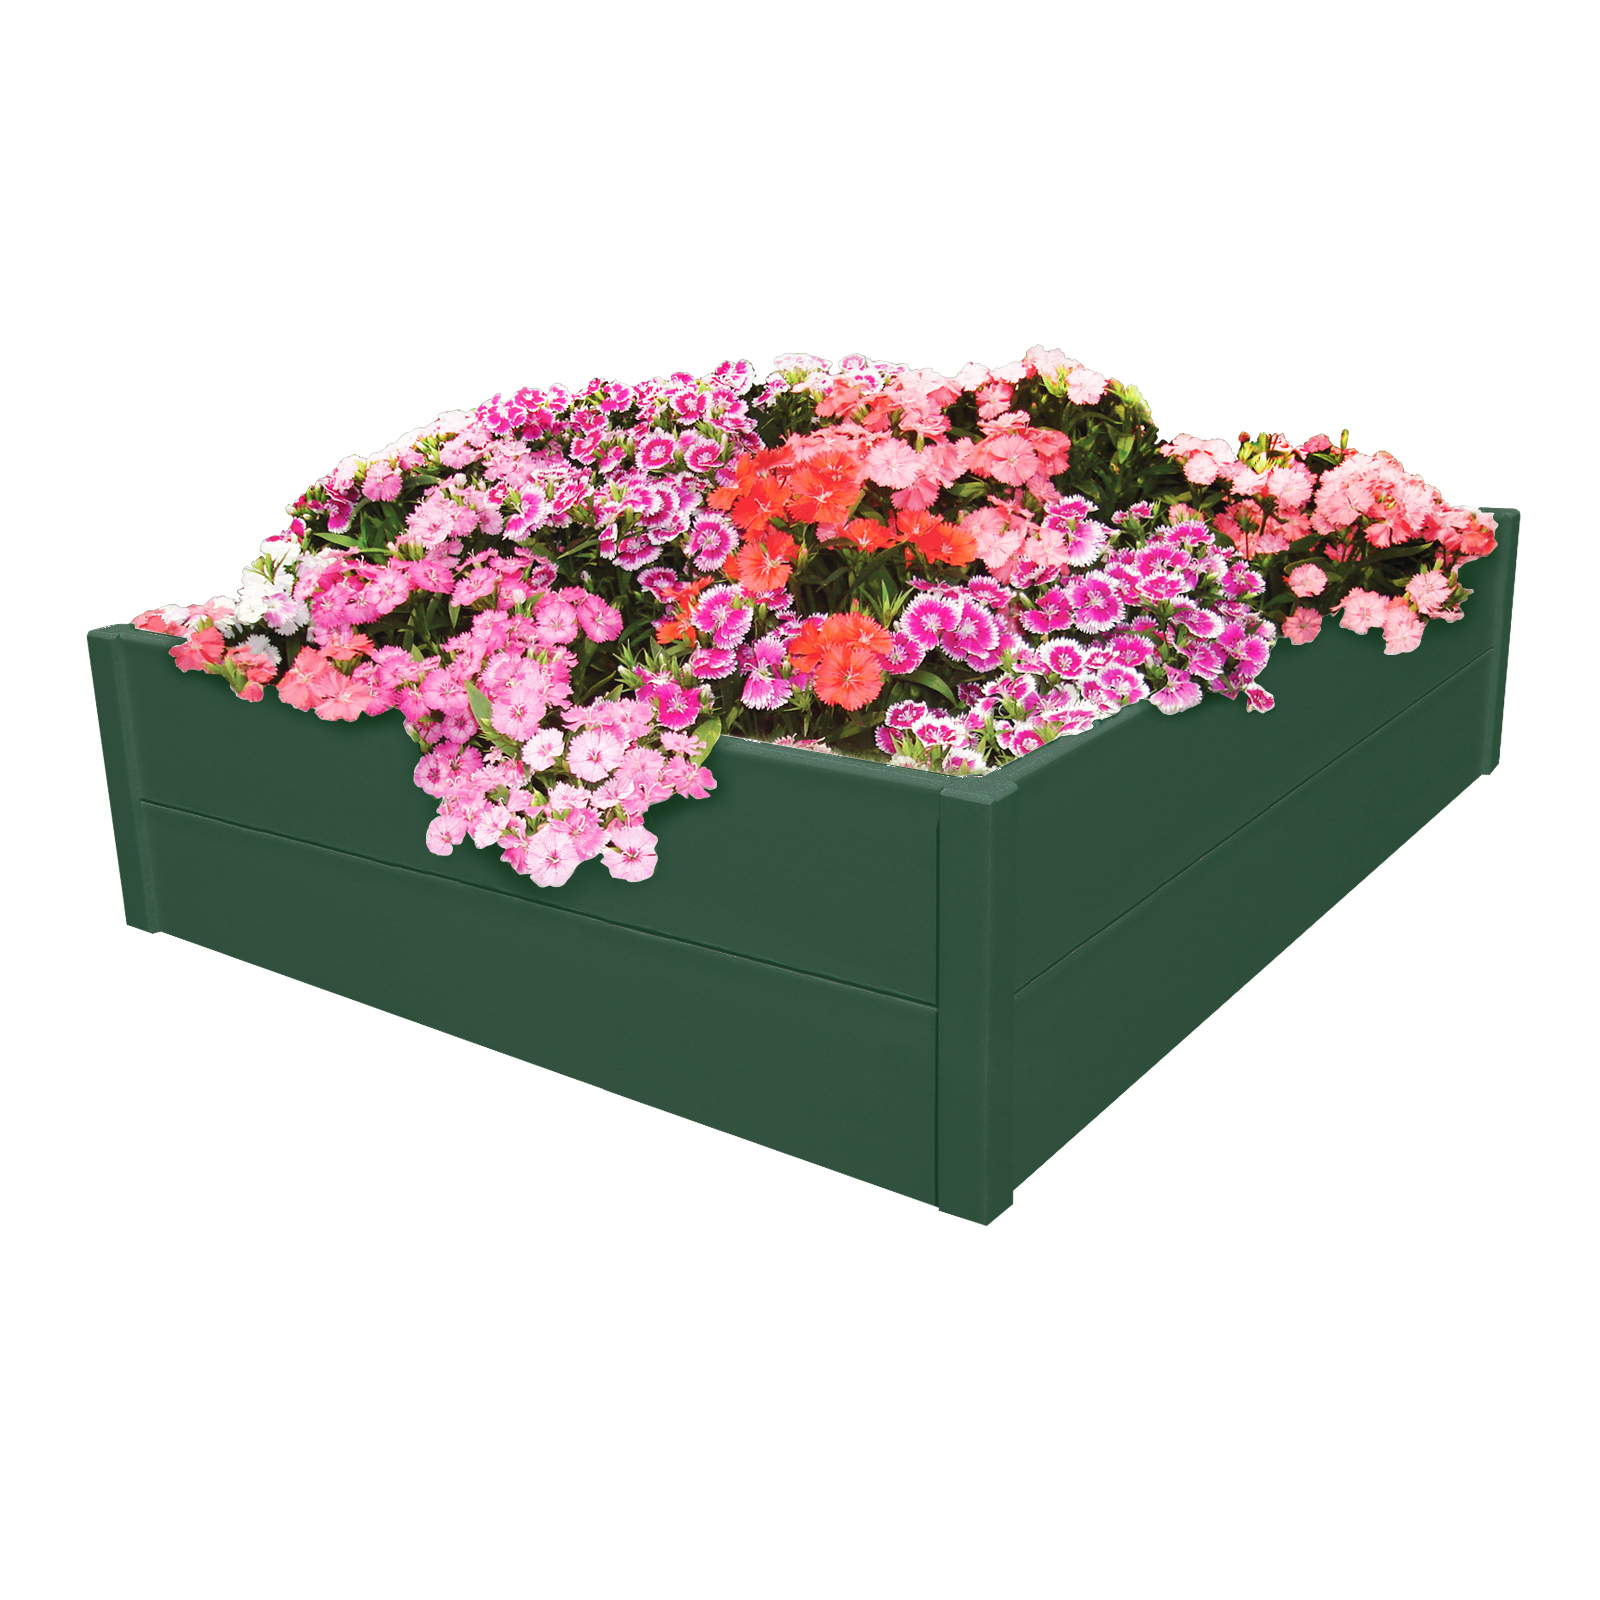 Raised Garden and Sand Commercial Grade Box 2 Tier, Green